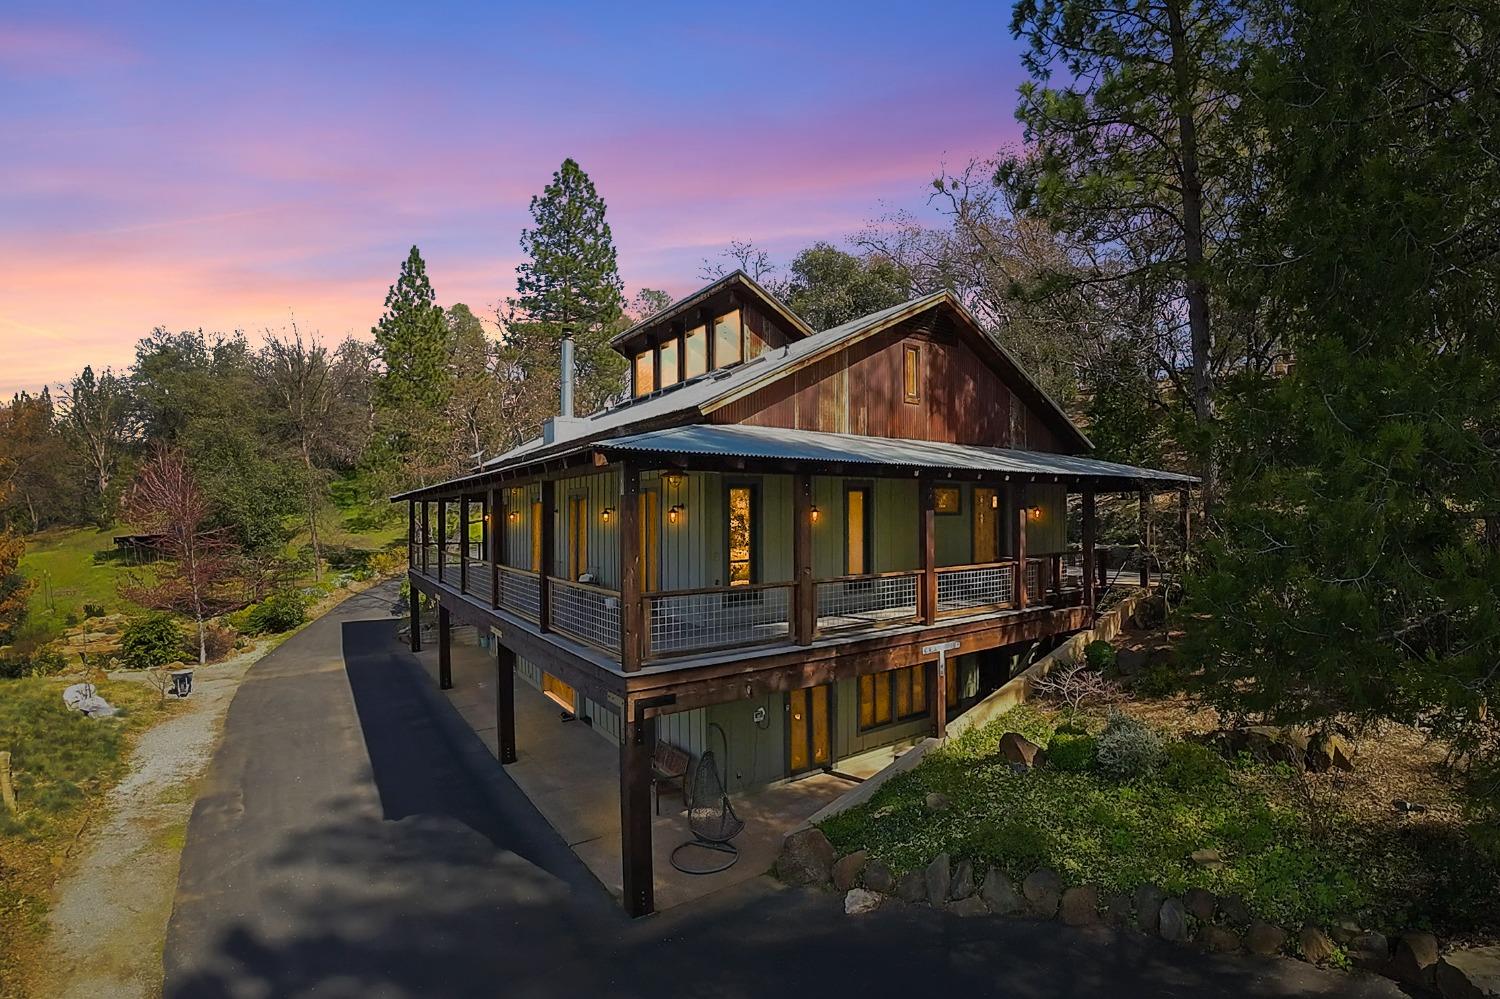 Explore luxury and privacy in the heart of Murphys, CA! Nestled on private and gated Burrows Lane, this 3-acre parcel features a custom-built craftsman stunner as its main house, offering 3000 square feet of refined finishes. Just moments away from the vibrant culture of Main St, Murphys.